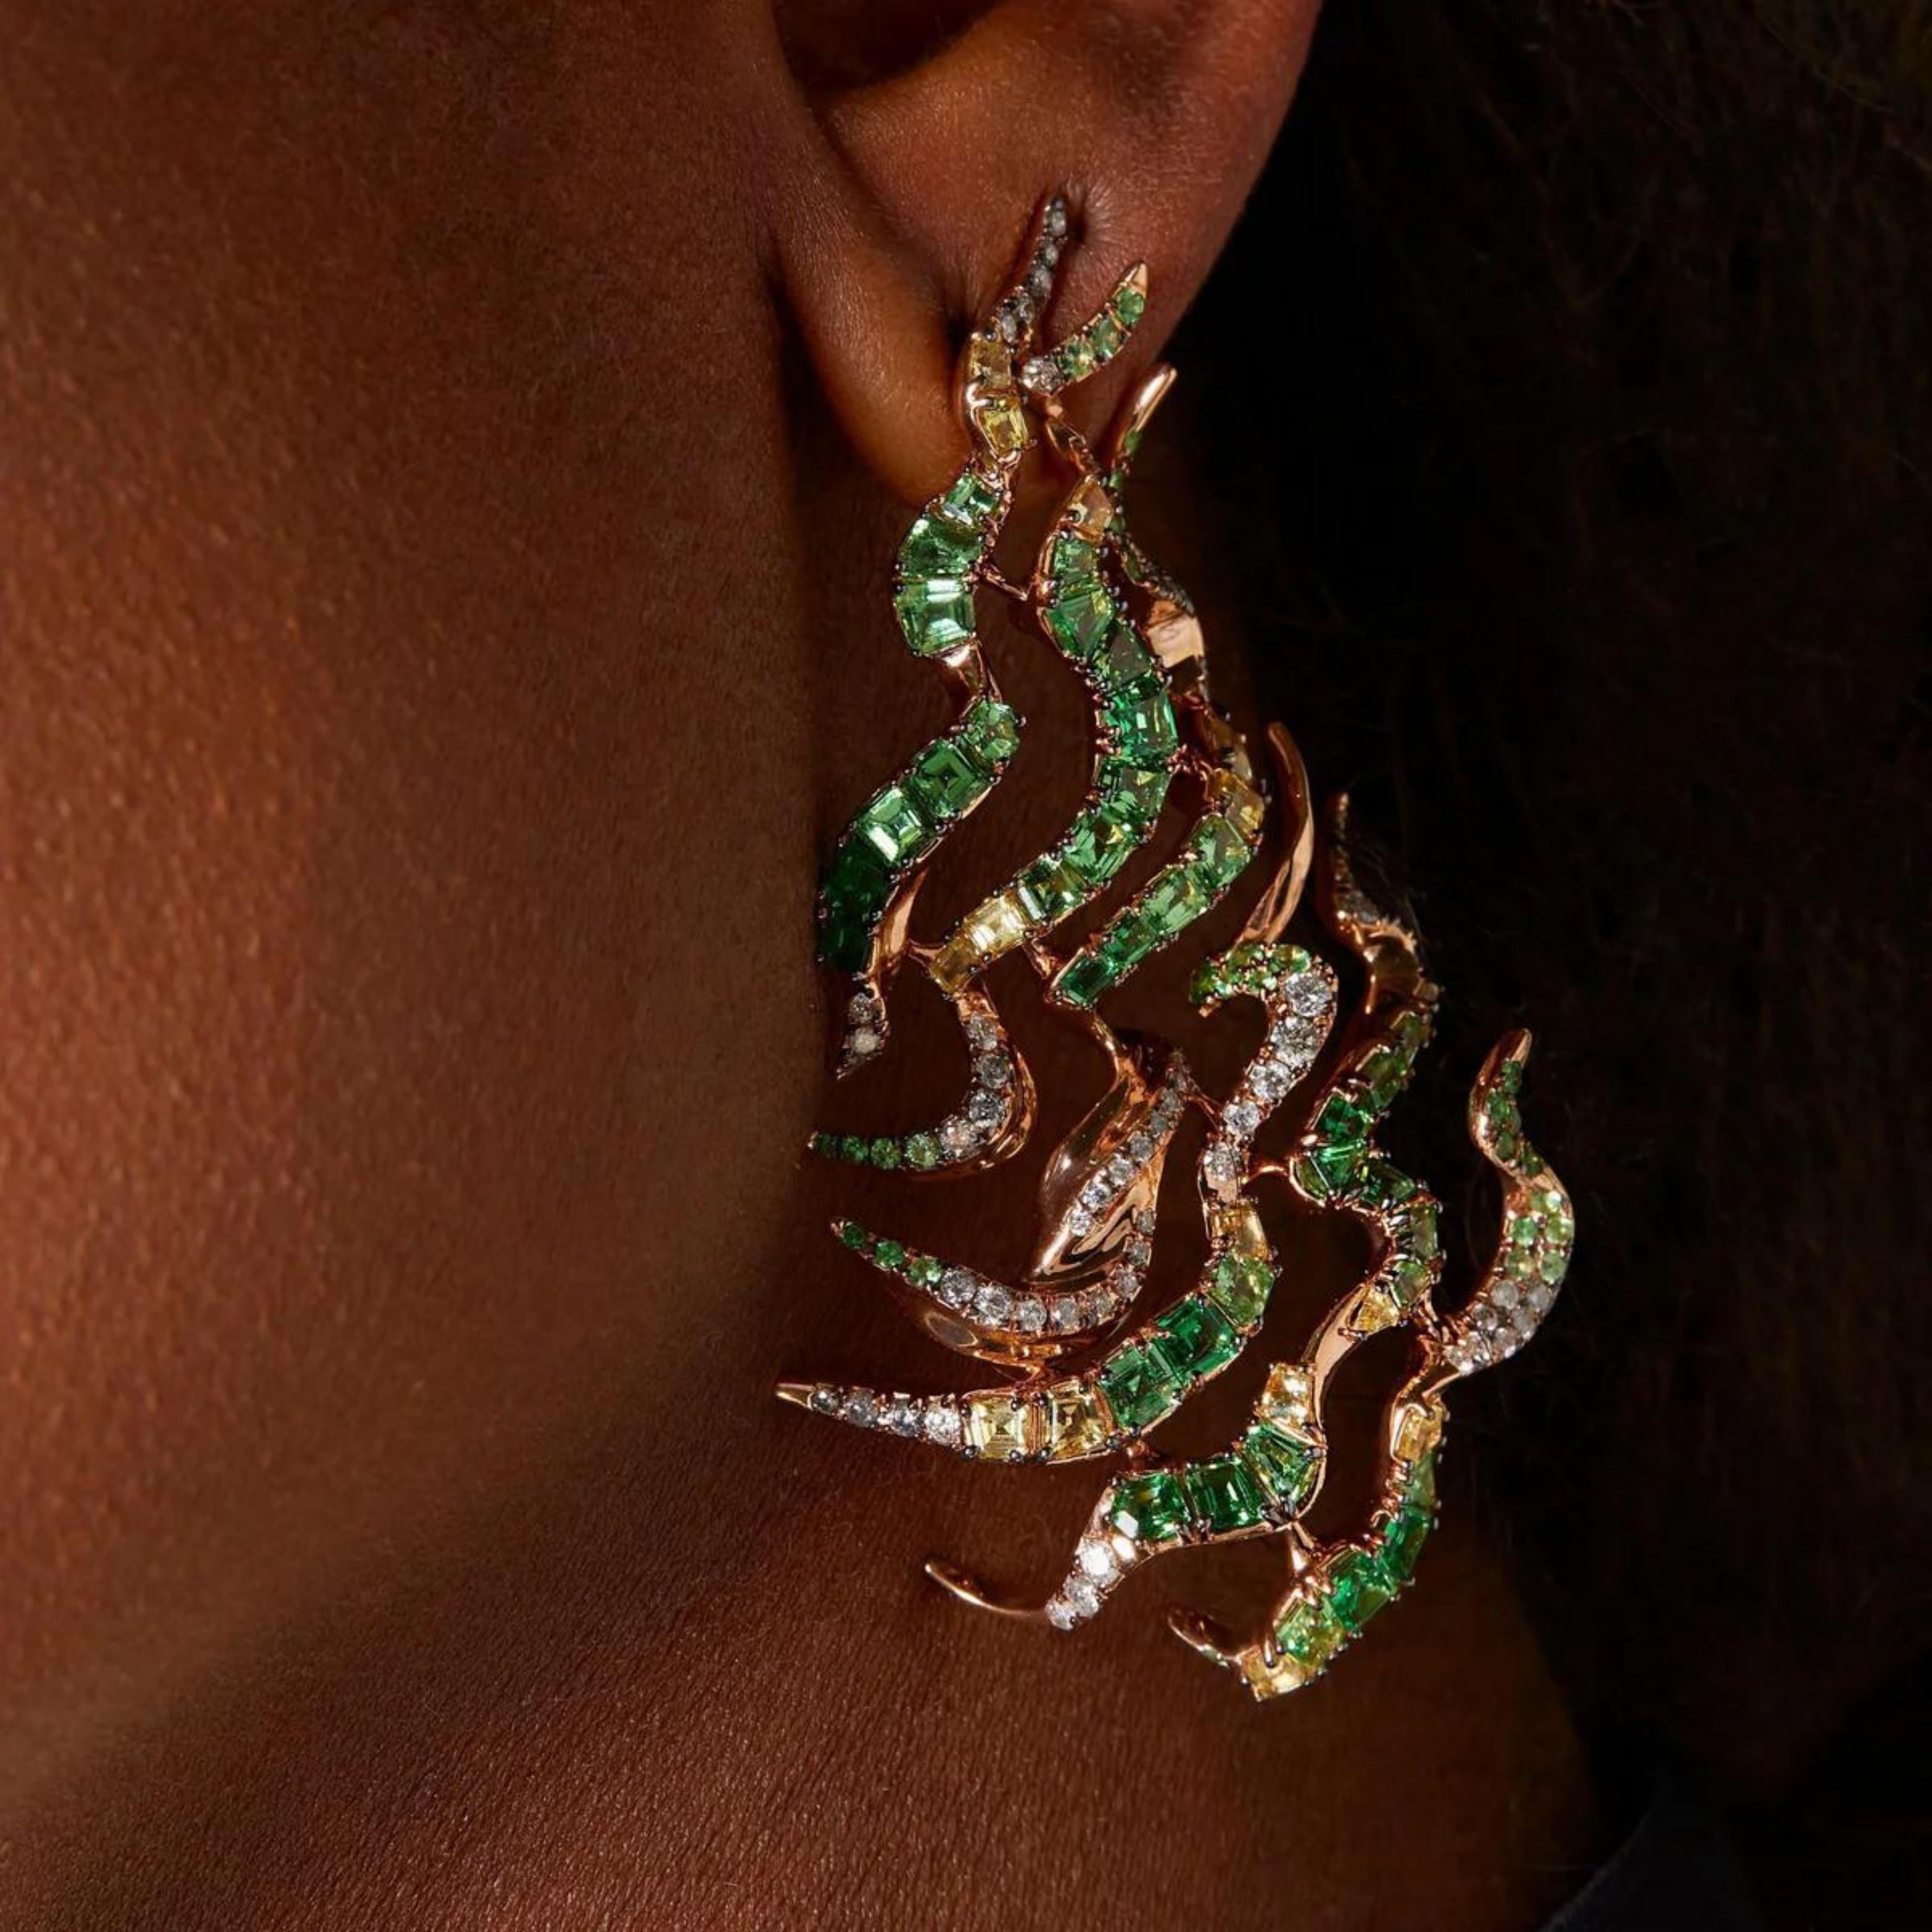 Bibi van der Velden Tsavorite Single Smoke Haze Earring. Crafted from multiple tsavorites, white and grey diamonds, and yellow sapphires and set in 18K Rose Gold this single earring invokes the beauty of a swirling haze of smoke. Shown on model.